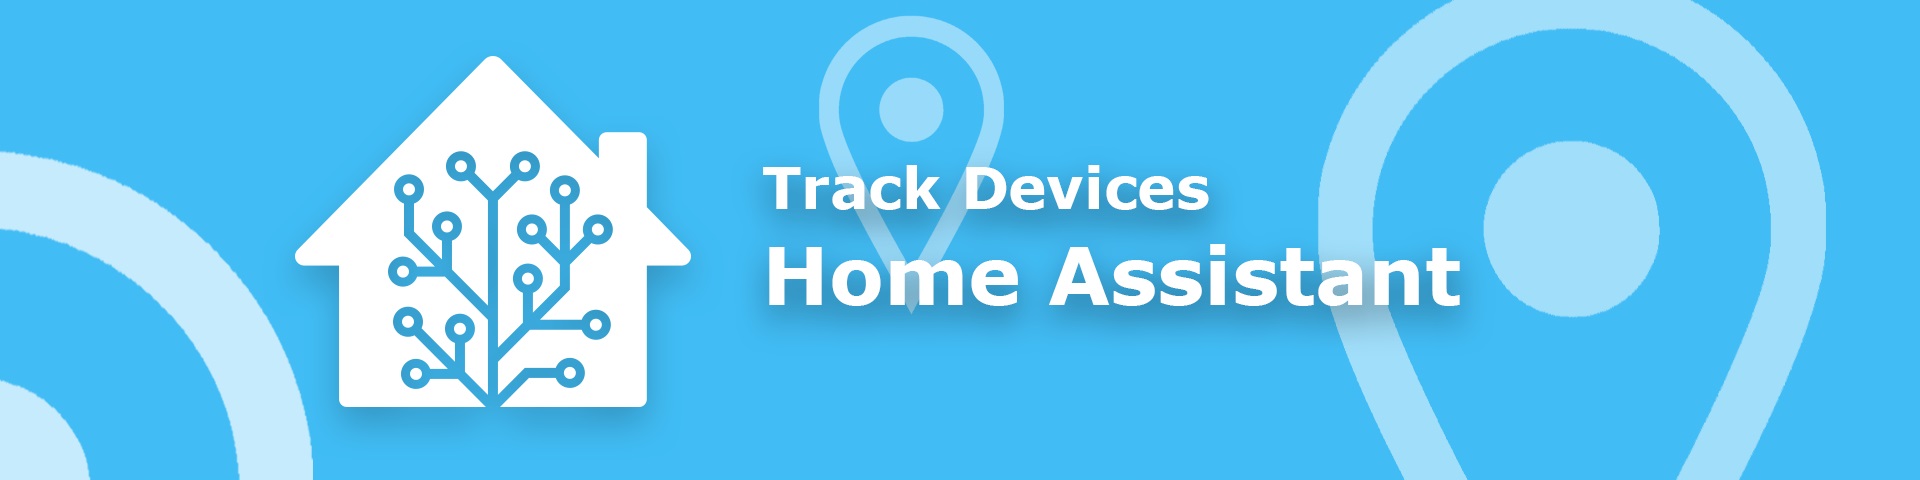 Track devices in Home Assistant